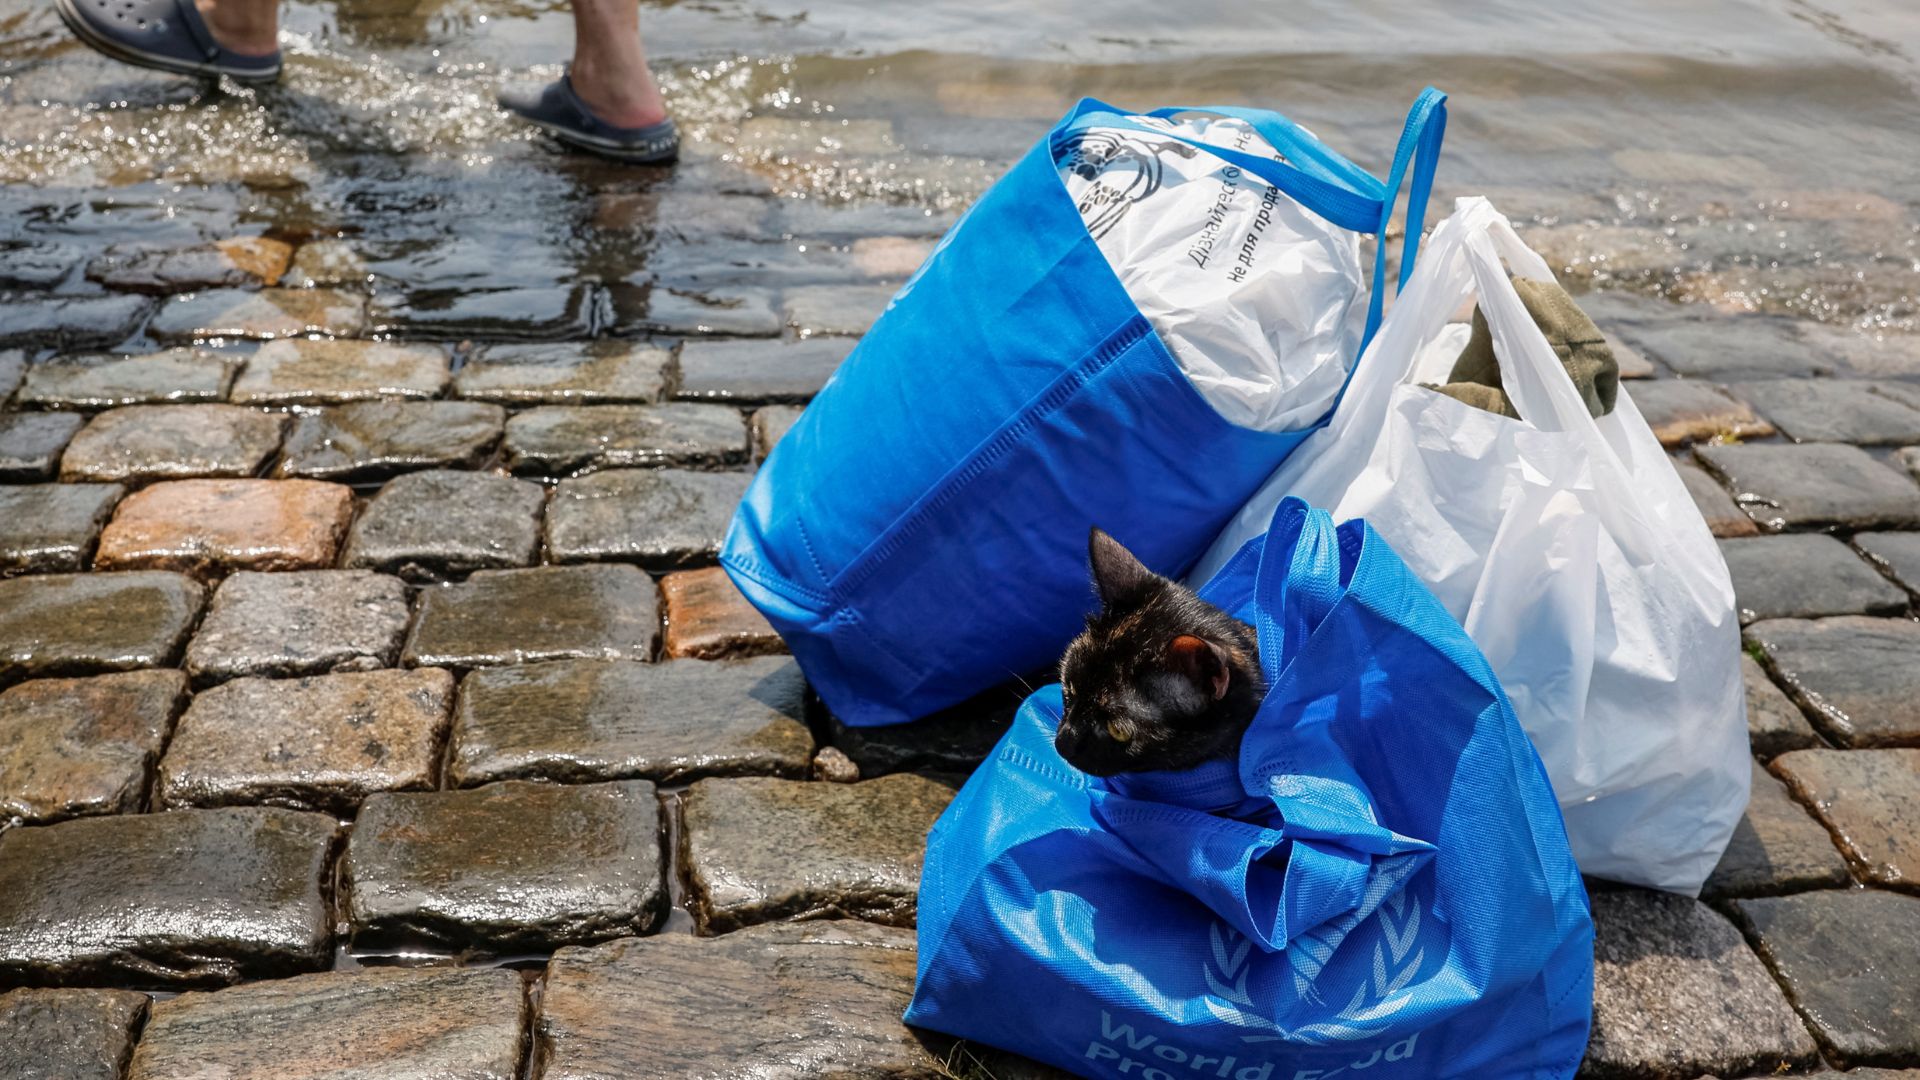 A rescued cat sits in a bag by the floodwaters. /Alina Smutko/Reuters